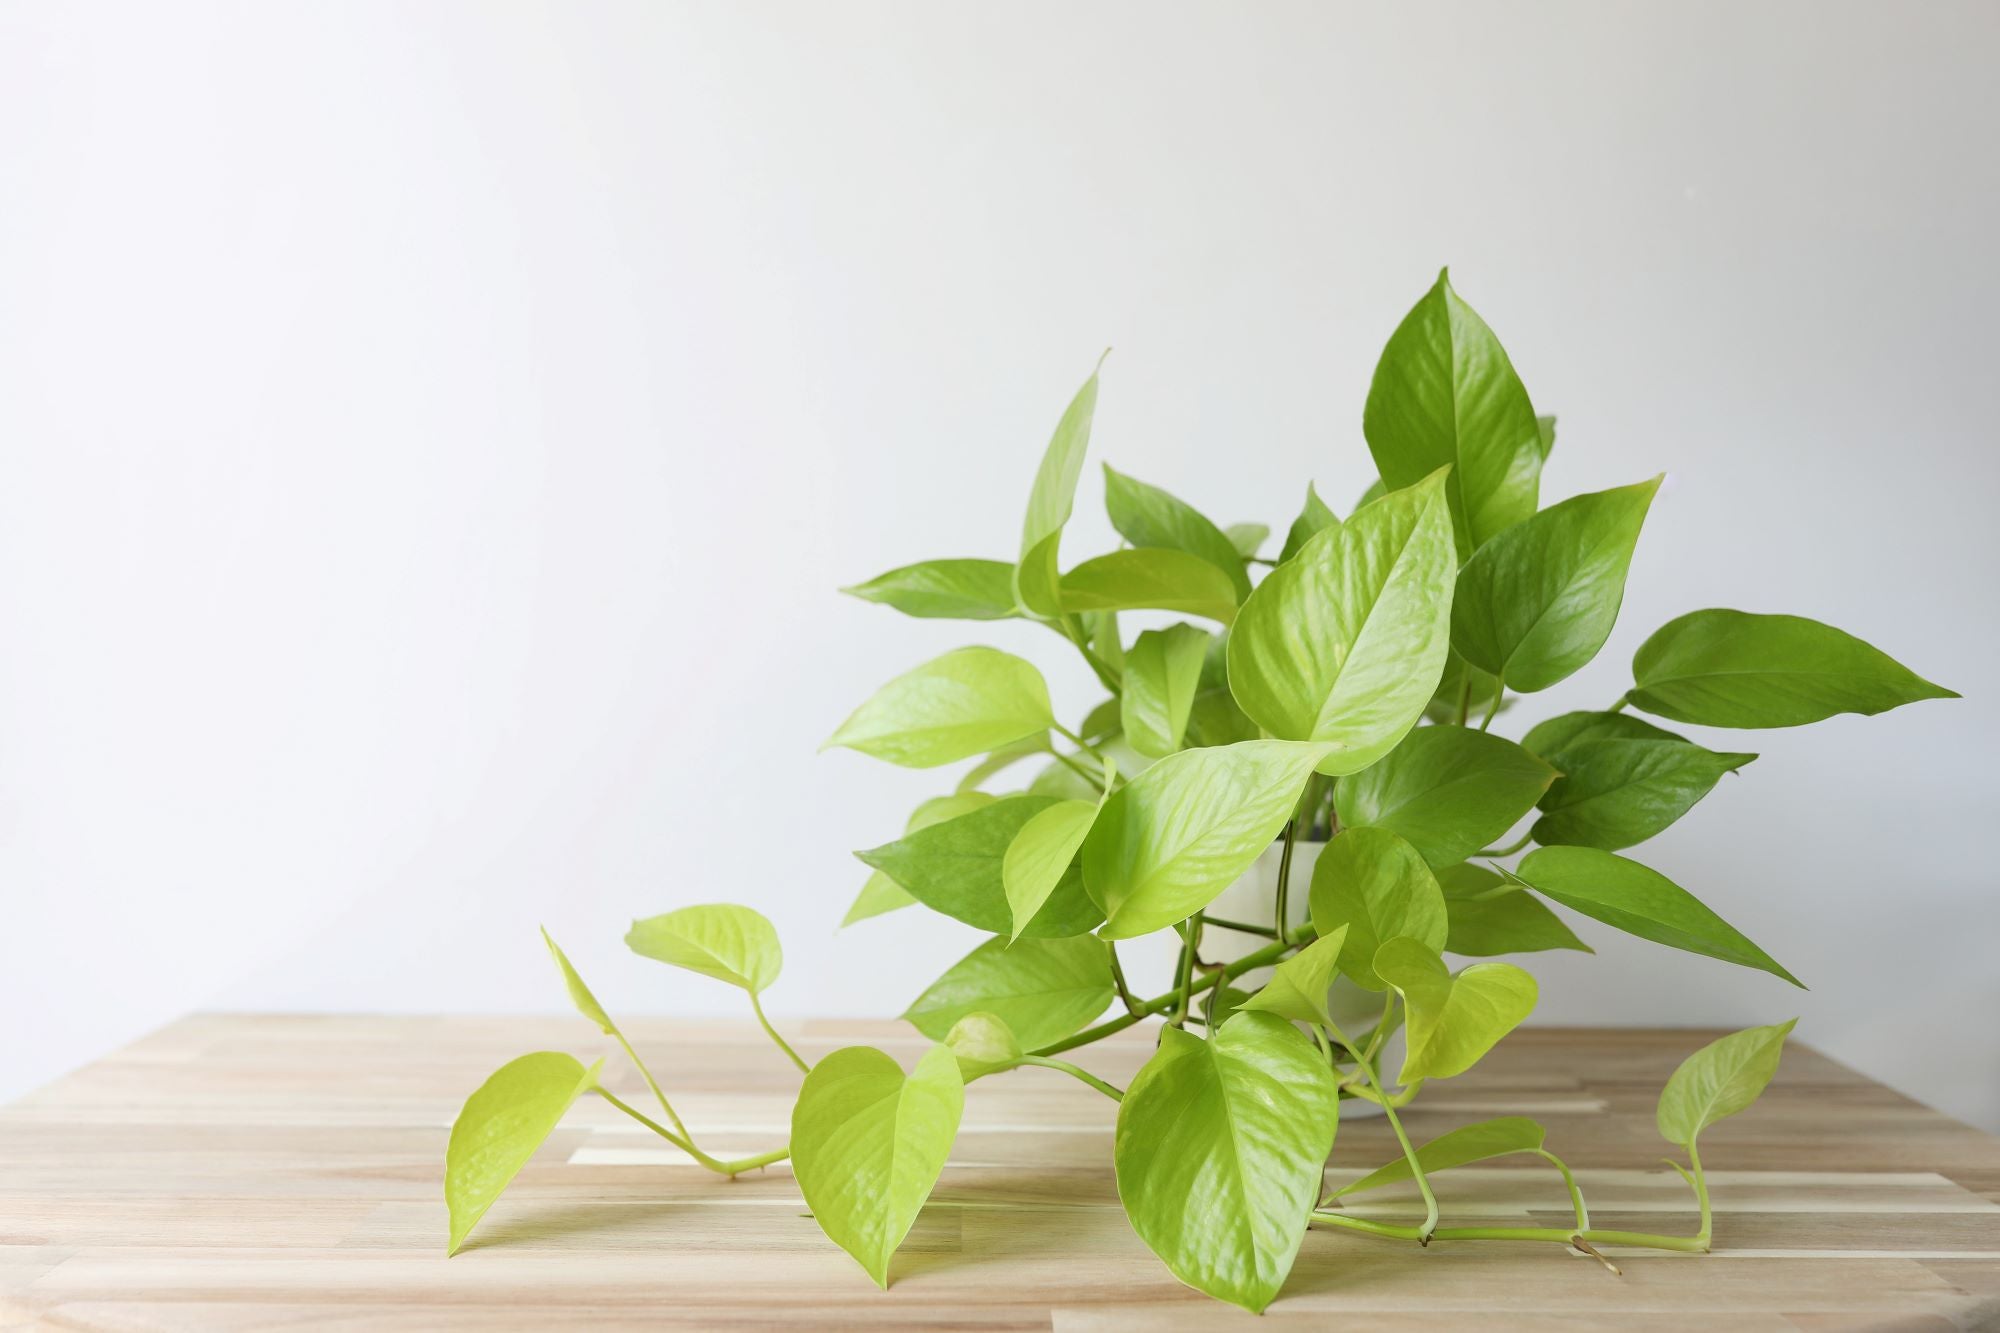 A vibrant neon pothos plant in a white pot, placed on a pine table against a white background. The leaves of the plant are bright and single-toned, but fade from a lime green color in the back of the plant to a citrus yellow in the front where new leaves vine down in front of the Epipremnum aureum plant.